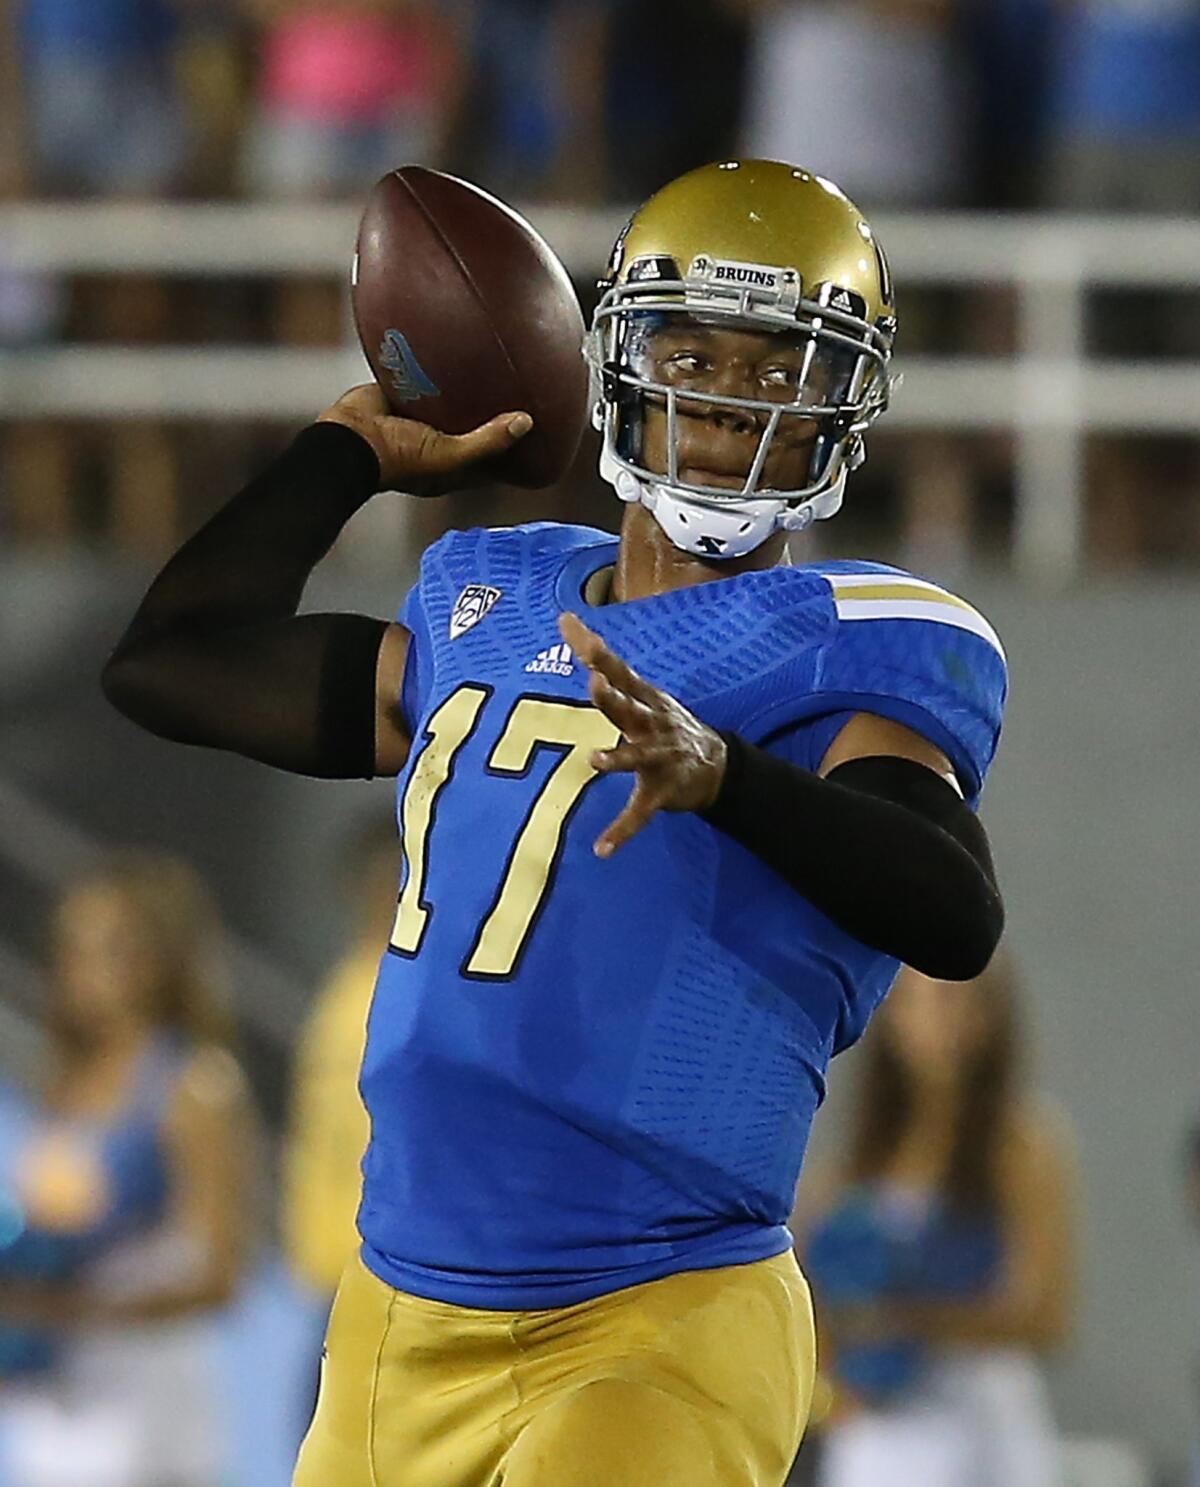 UCLA quarterback Brett Hundley has been at the center of the Bruins' efforts this season to put up the best offensive numbers in school history.